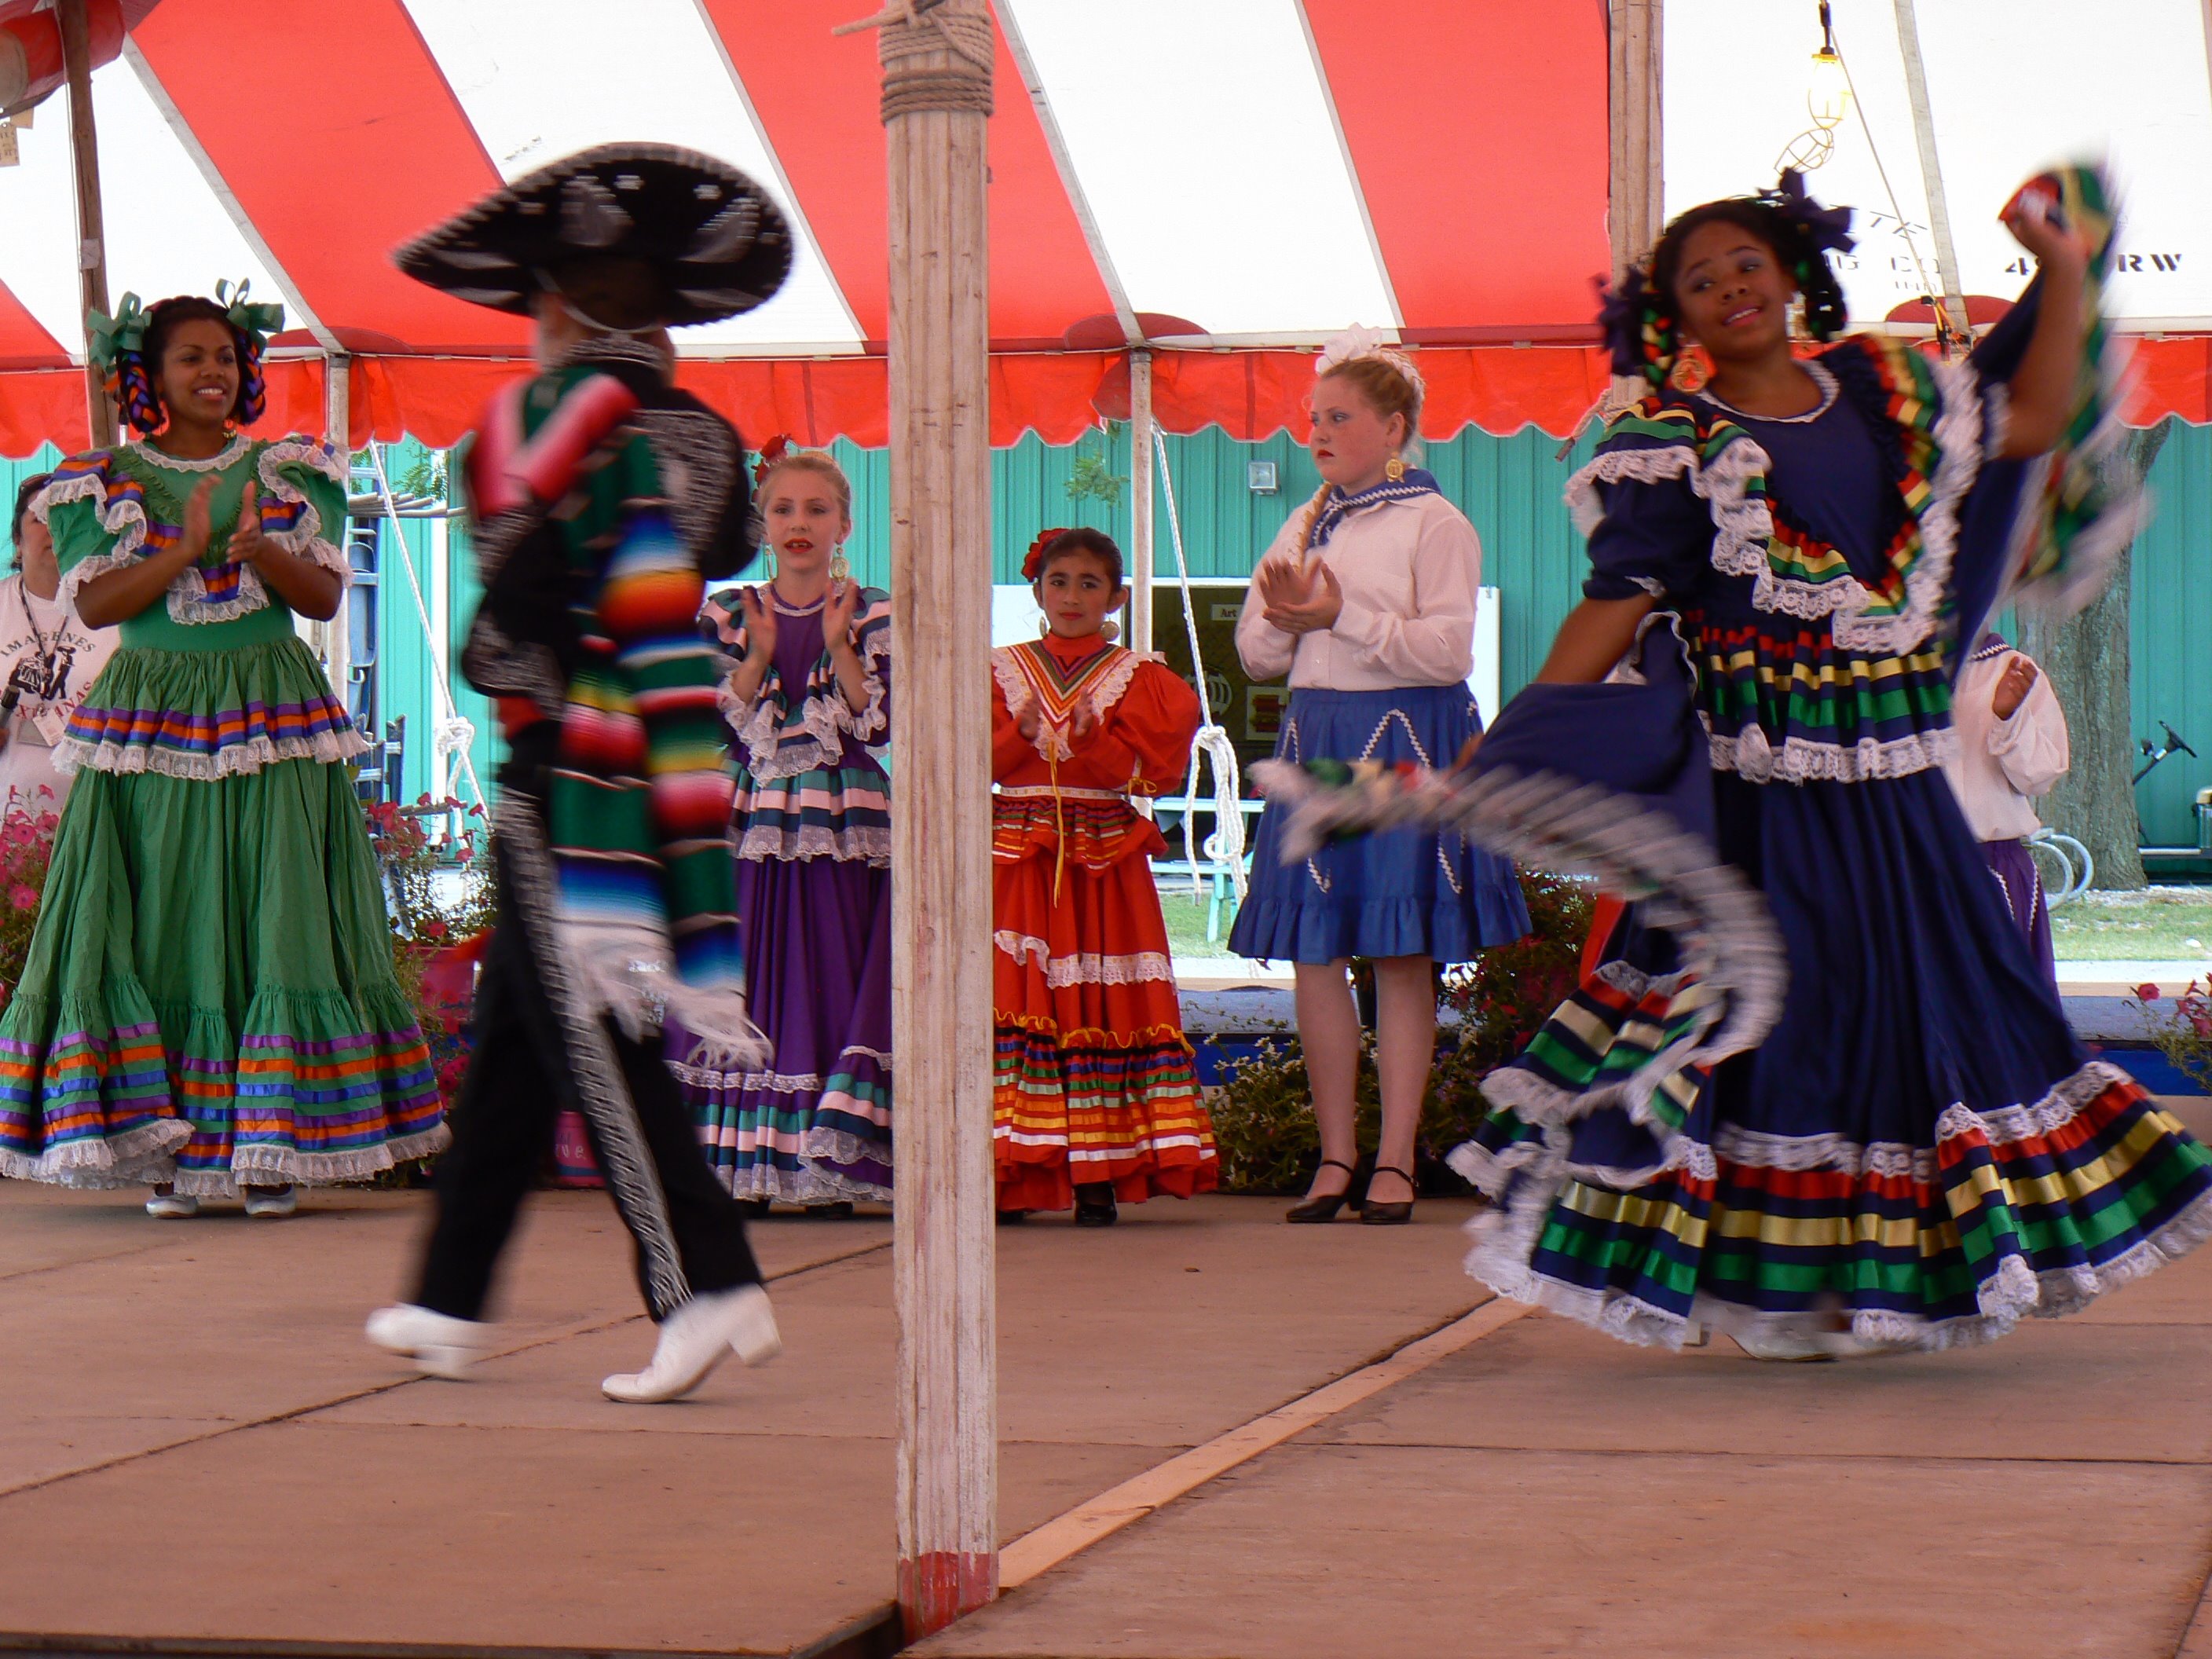 Two dancers performing ballet folklorico, with four others dressed in ballet folklorico dresses cheering them on.